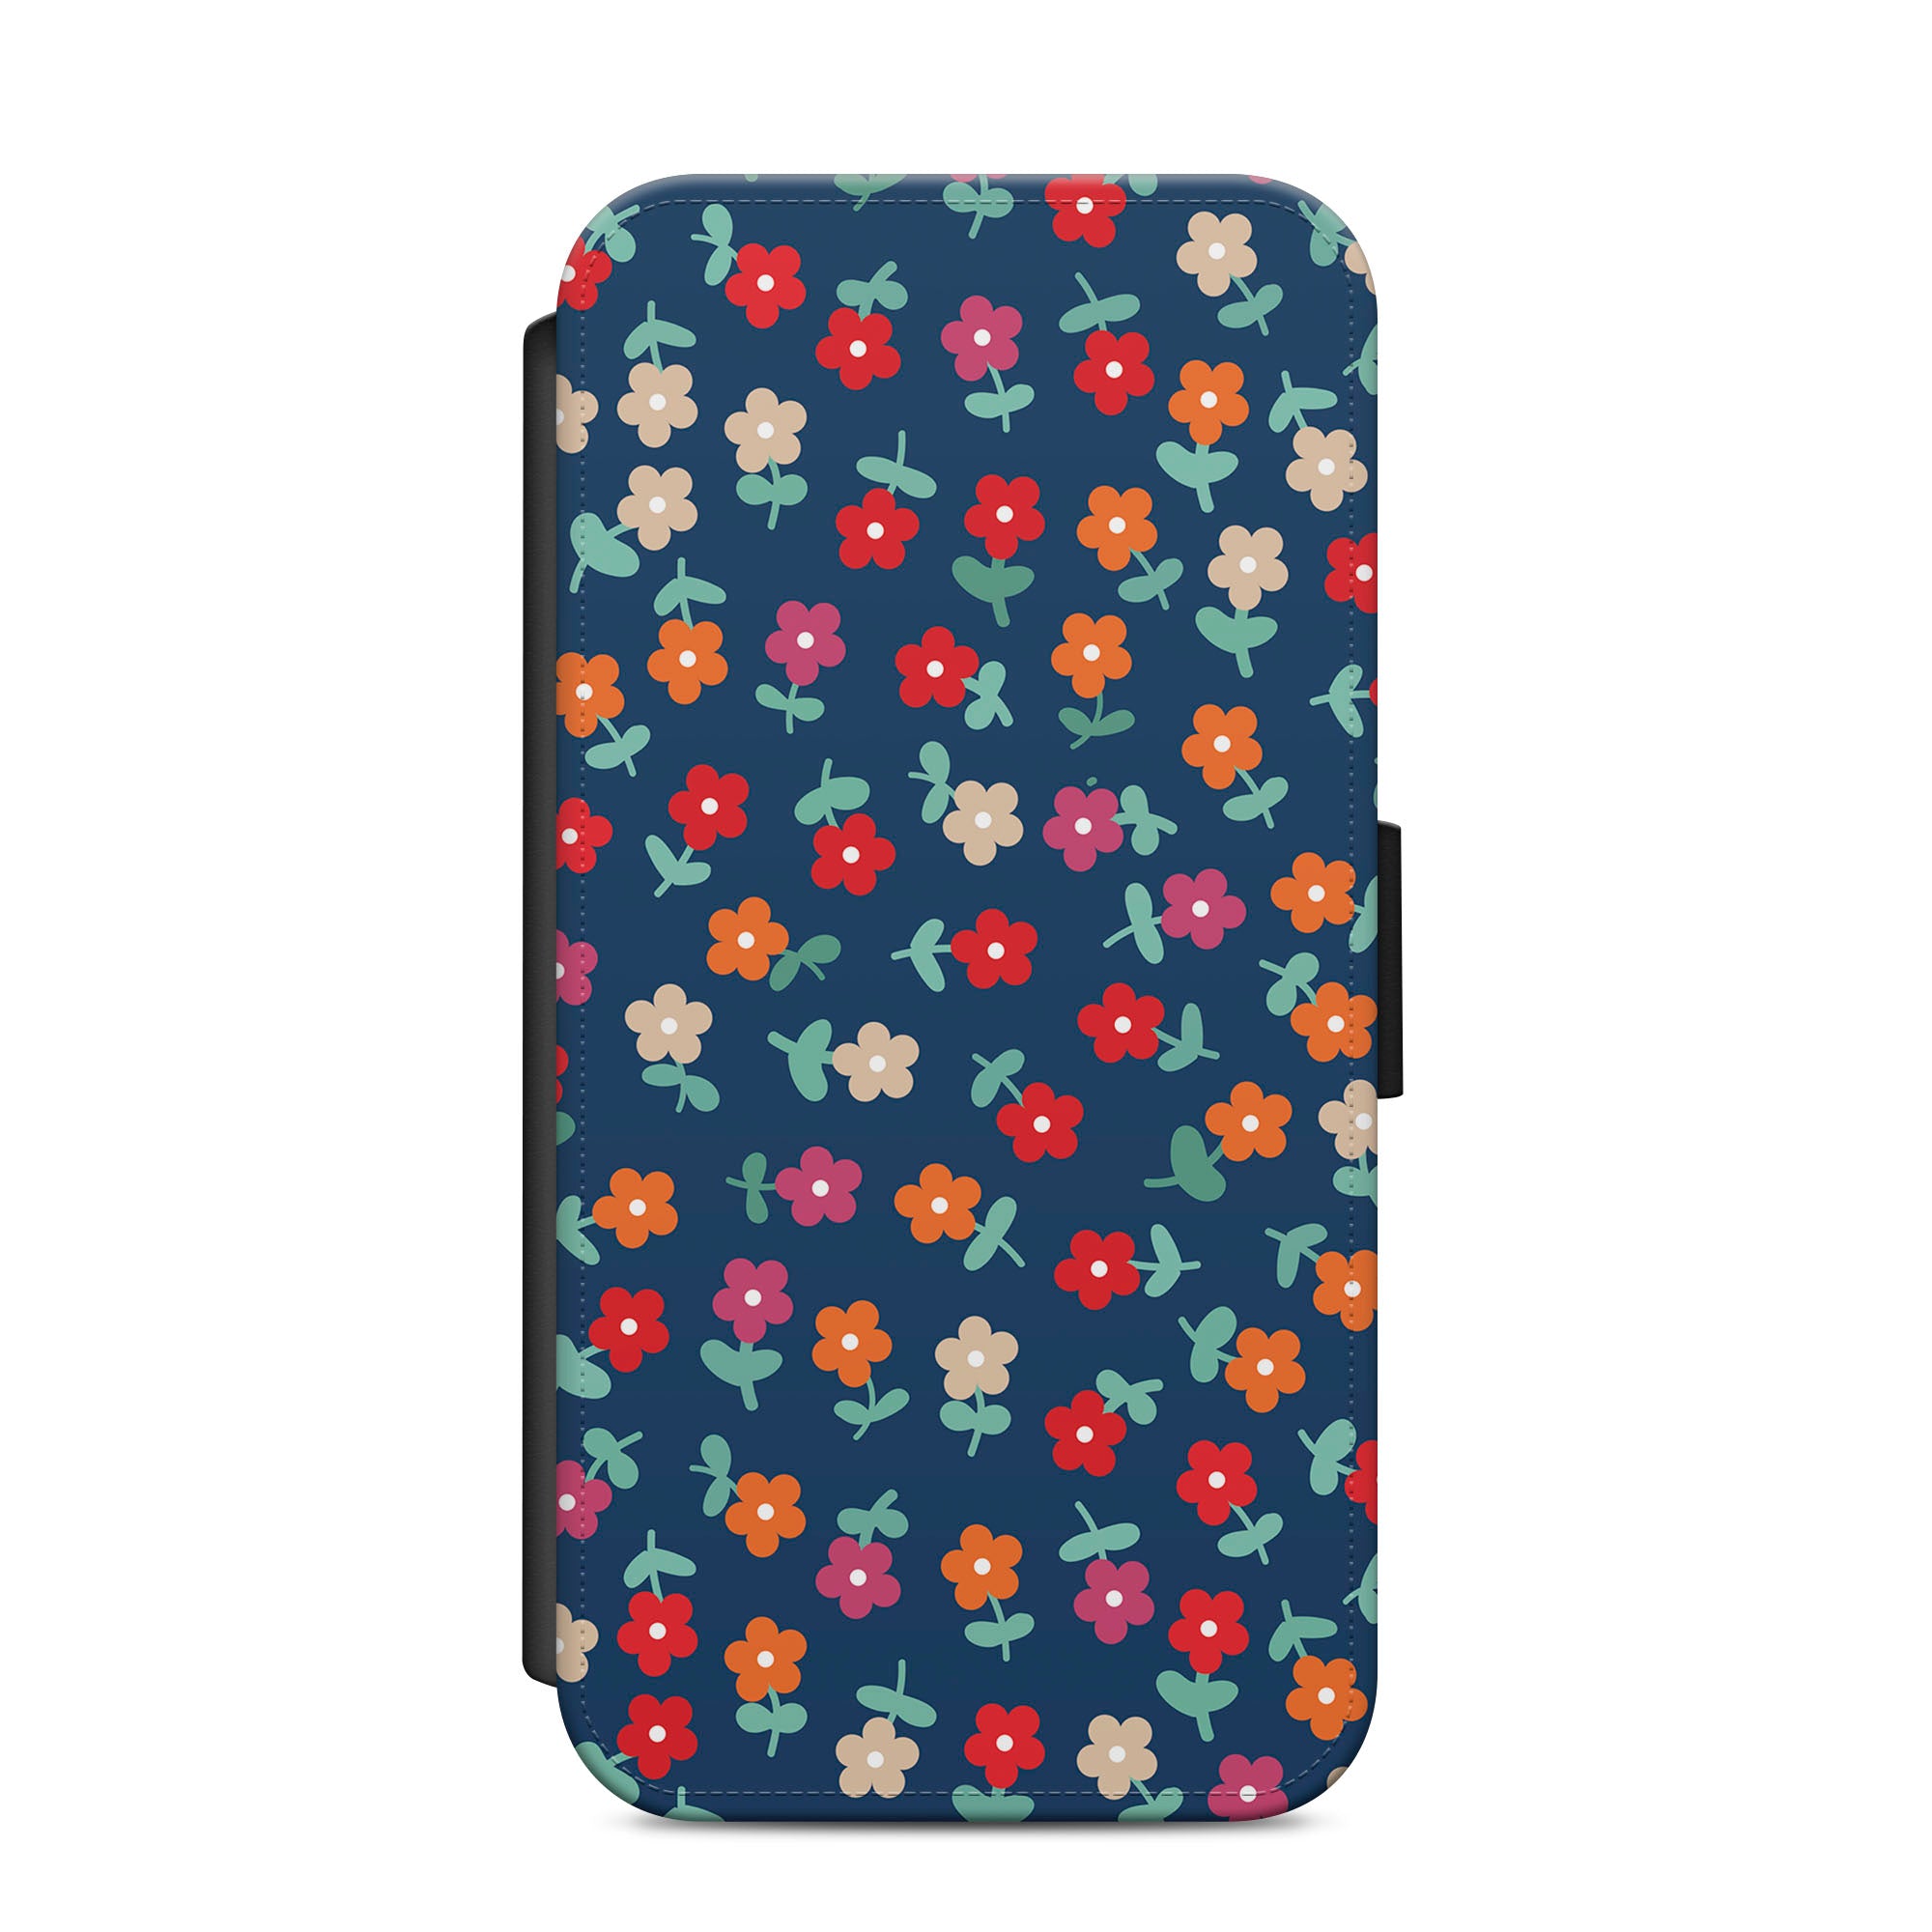 Navy Blue Floral Pattern Faux Leather Flip Case Wallet for iPhone / Samsung